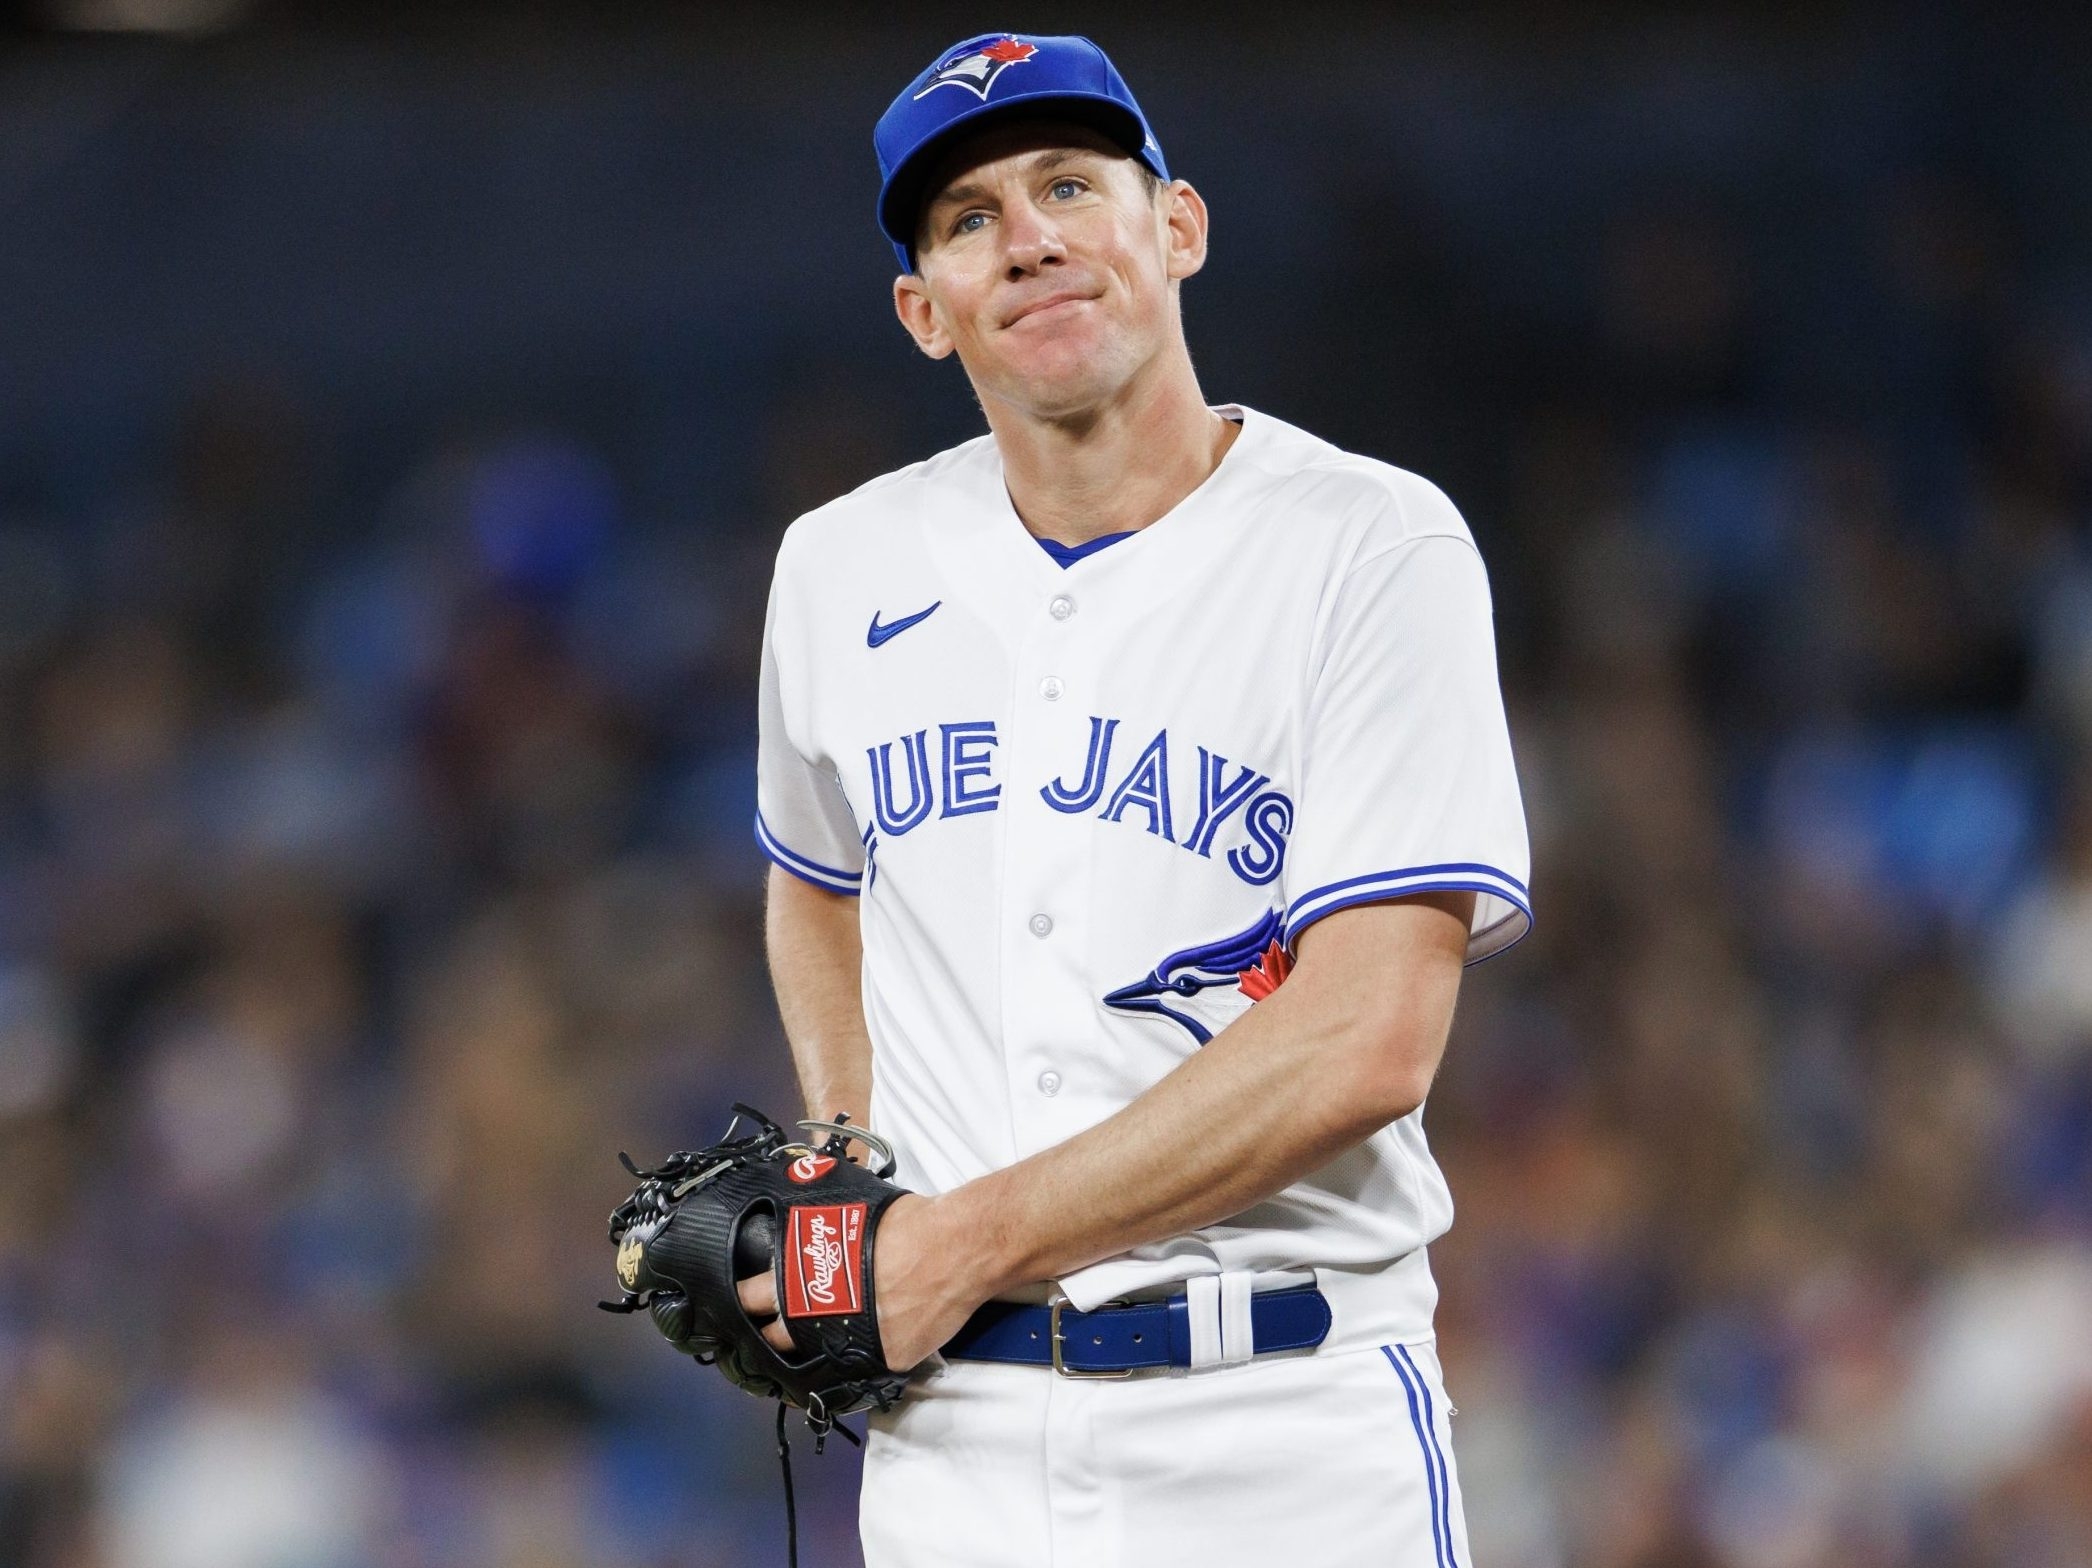 Blue Jays settle for series split with Rays as offence sputters